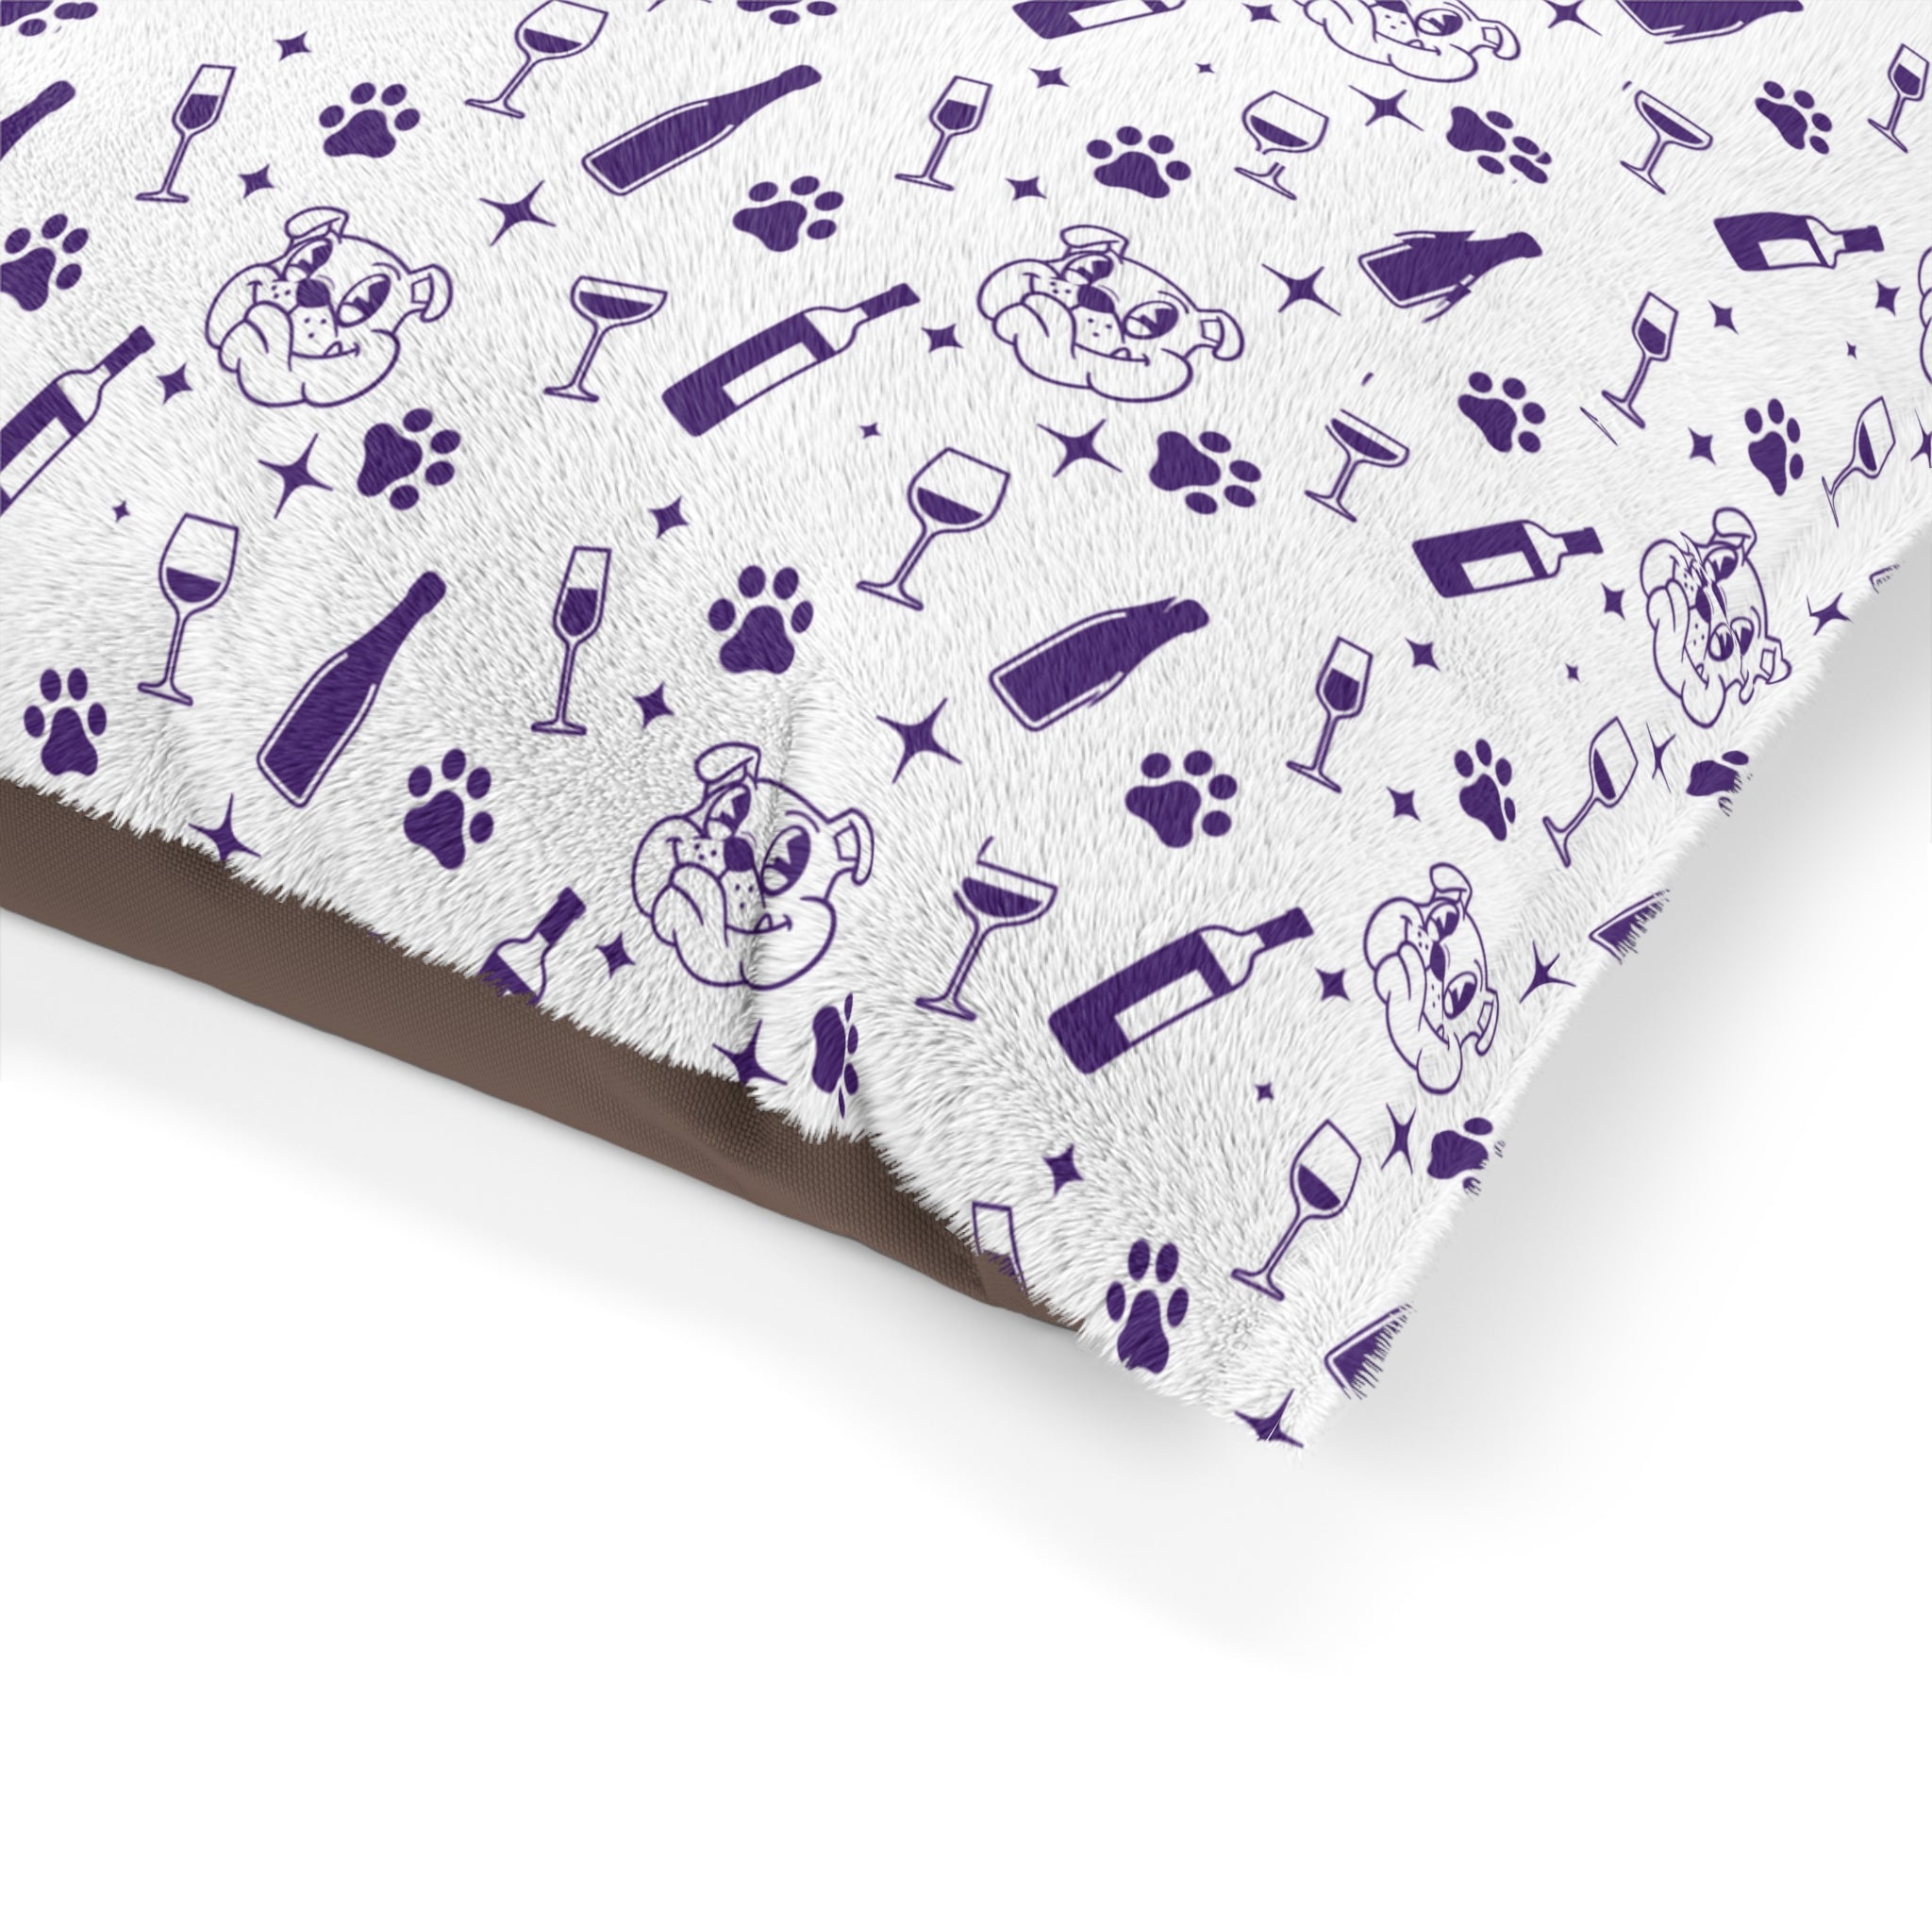 Tipsy Bully Dog Bed: Where Dreams of Wine and Woofs Collide! - Purple